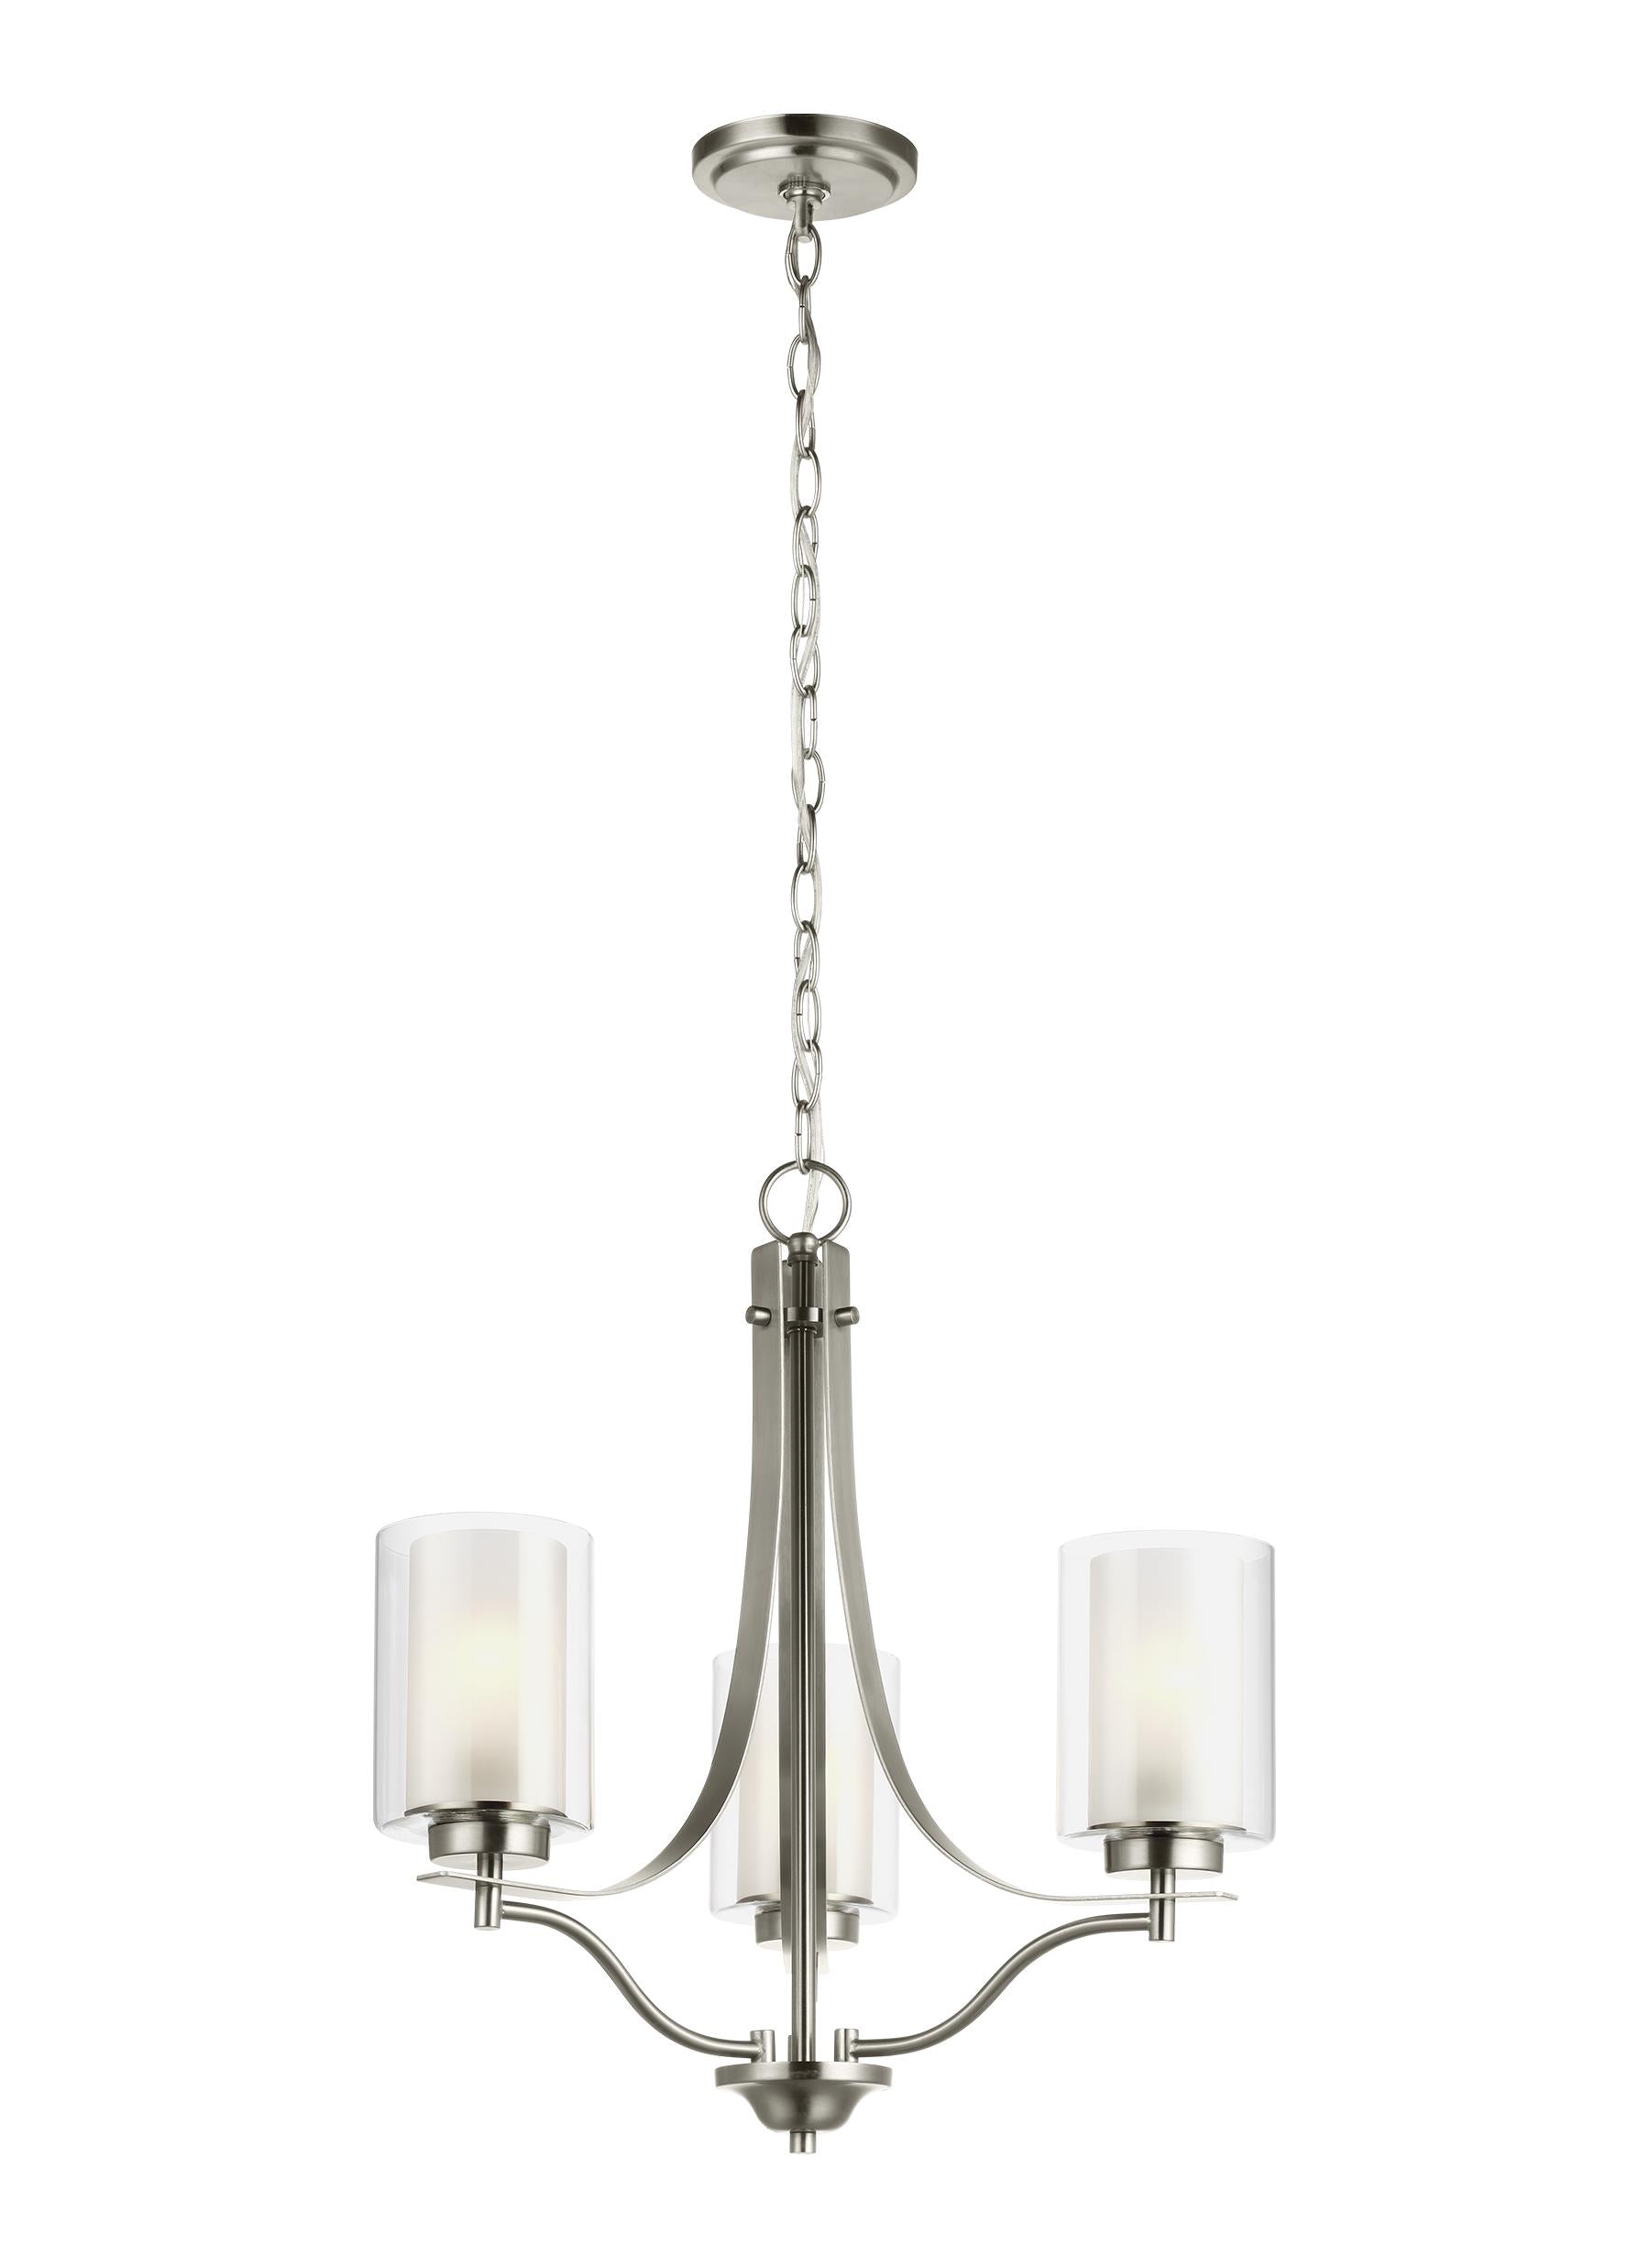 Elmwood Park traditional 3-light indoor dimmable ceiling chandelier pendant light in brushed nickel silver finish with sat...